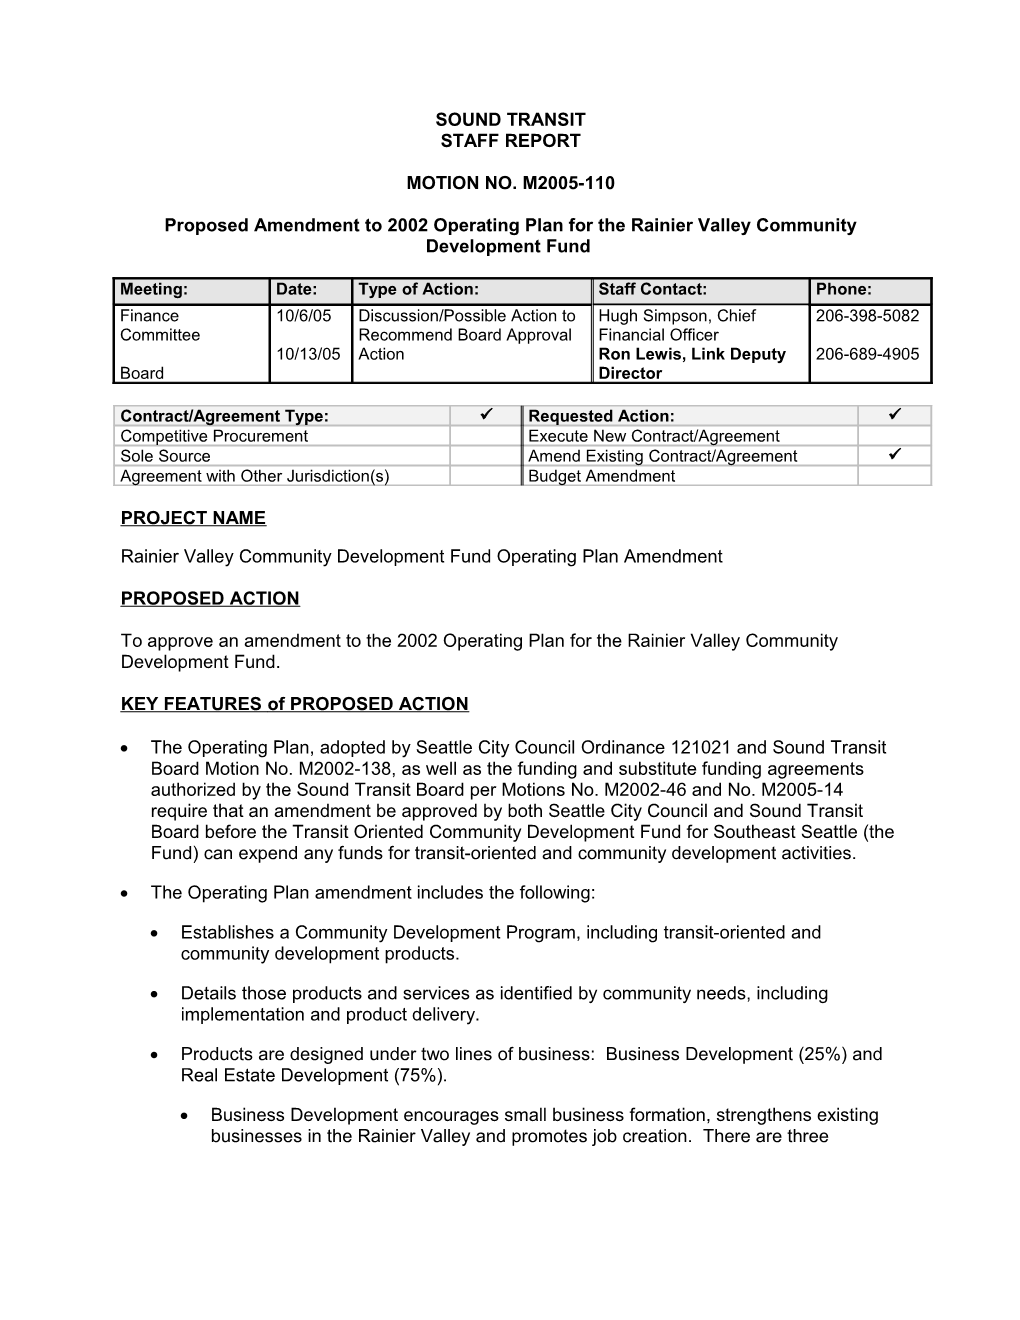 Proposed Amendment to 2002 Operating Plan for the Rainiervalley Community Development Fund